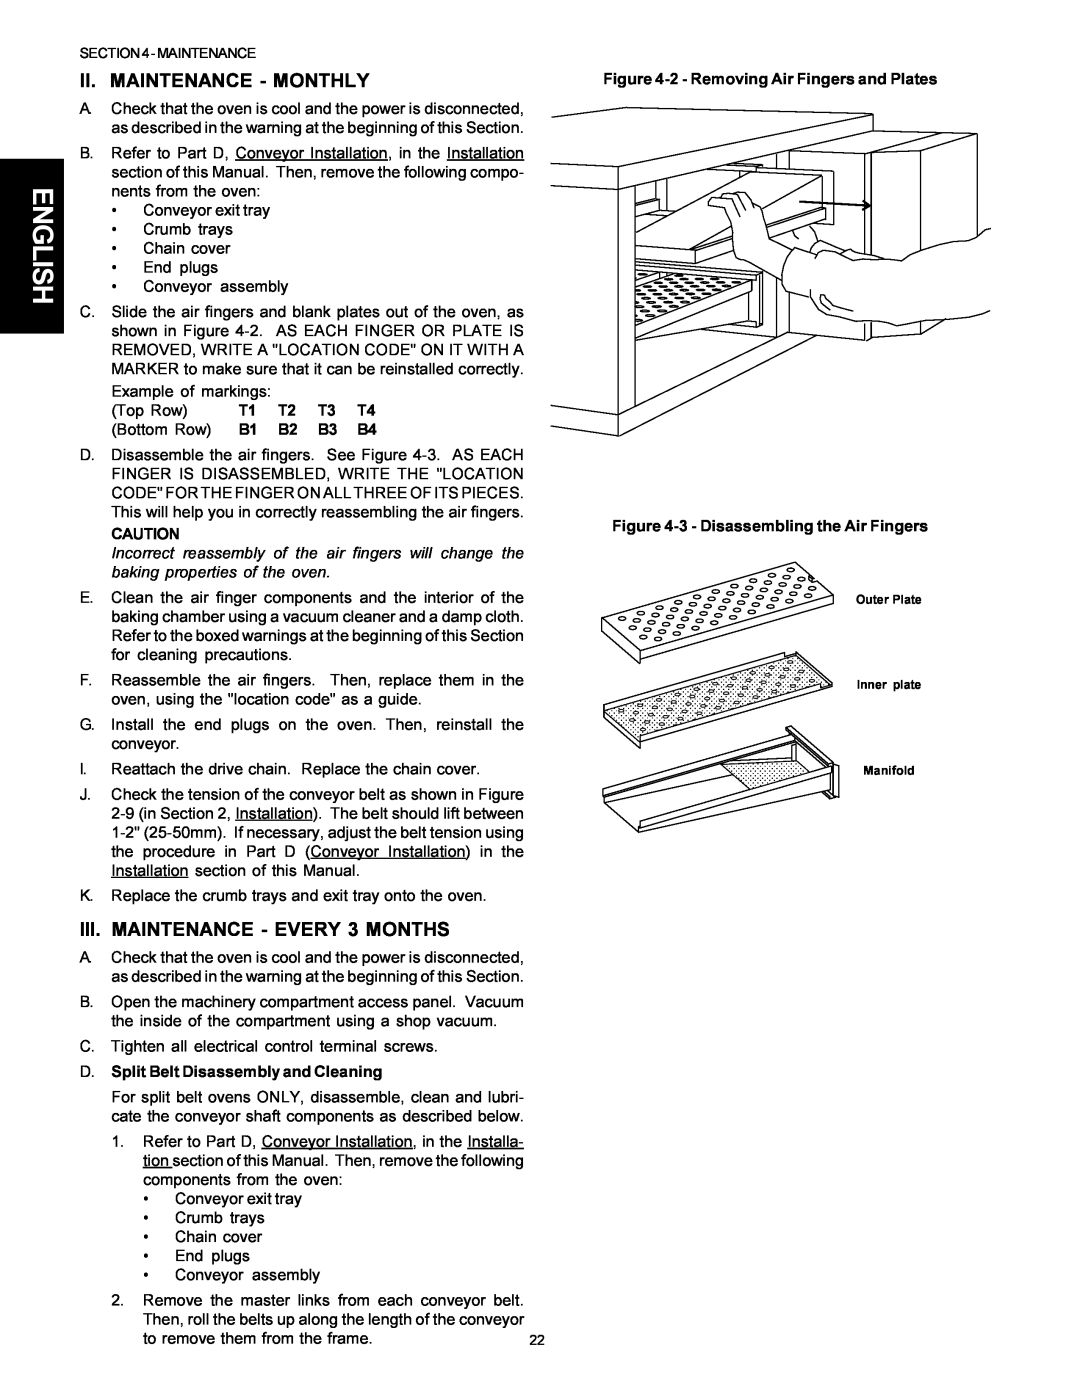 Middleby Marshall Model PS536 installation manual English, Ii. Maintenance - Monthly, III. MAINTENANCE - EVERY 3 MONTHS 